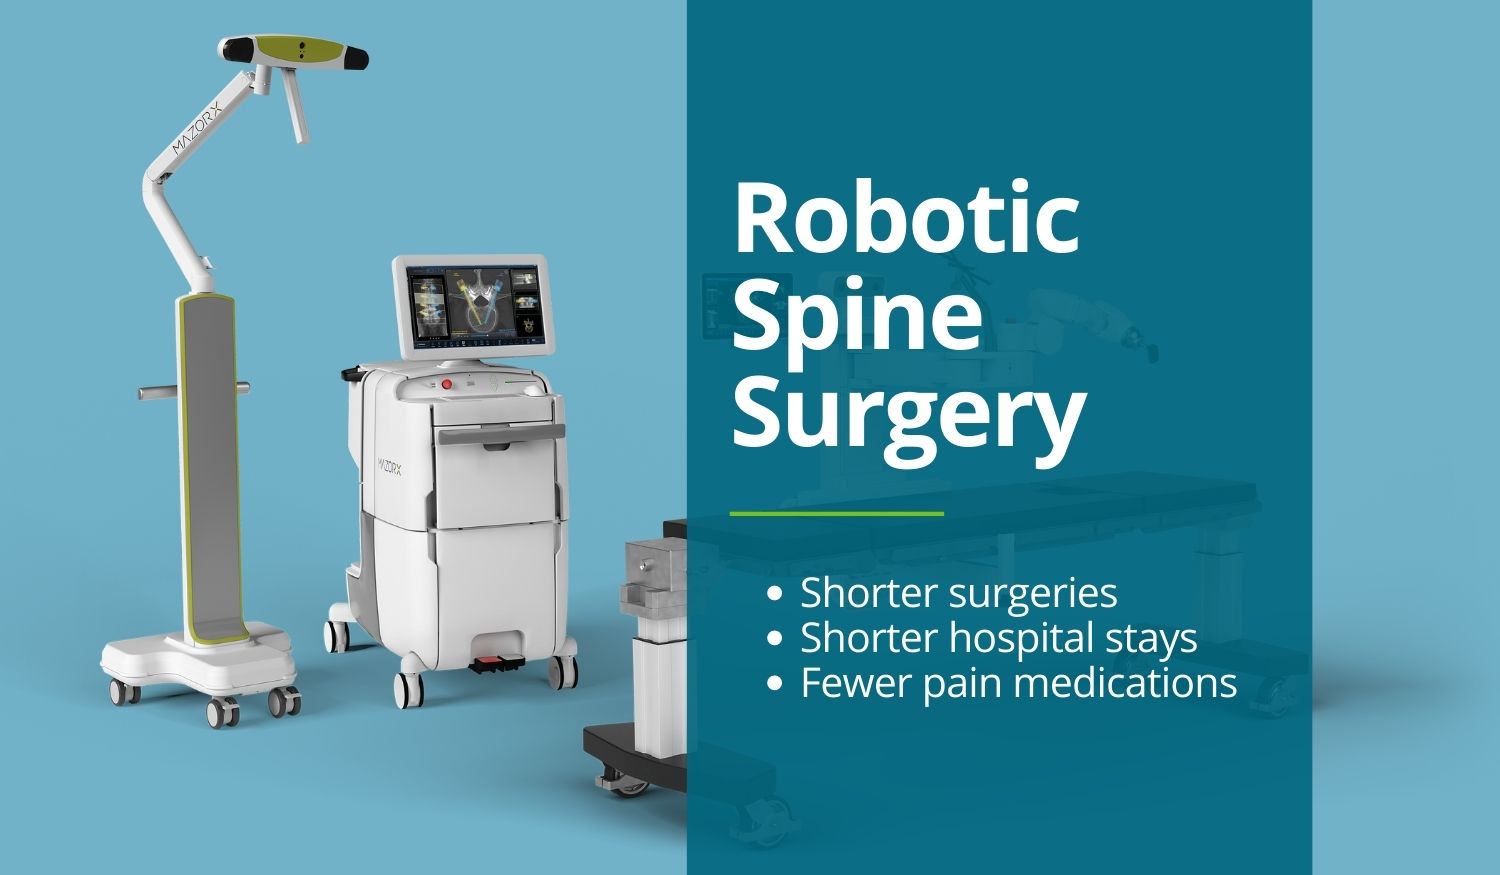 Is Robotic Spine Surgery an option to eliminate back and neck pain?